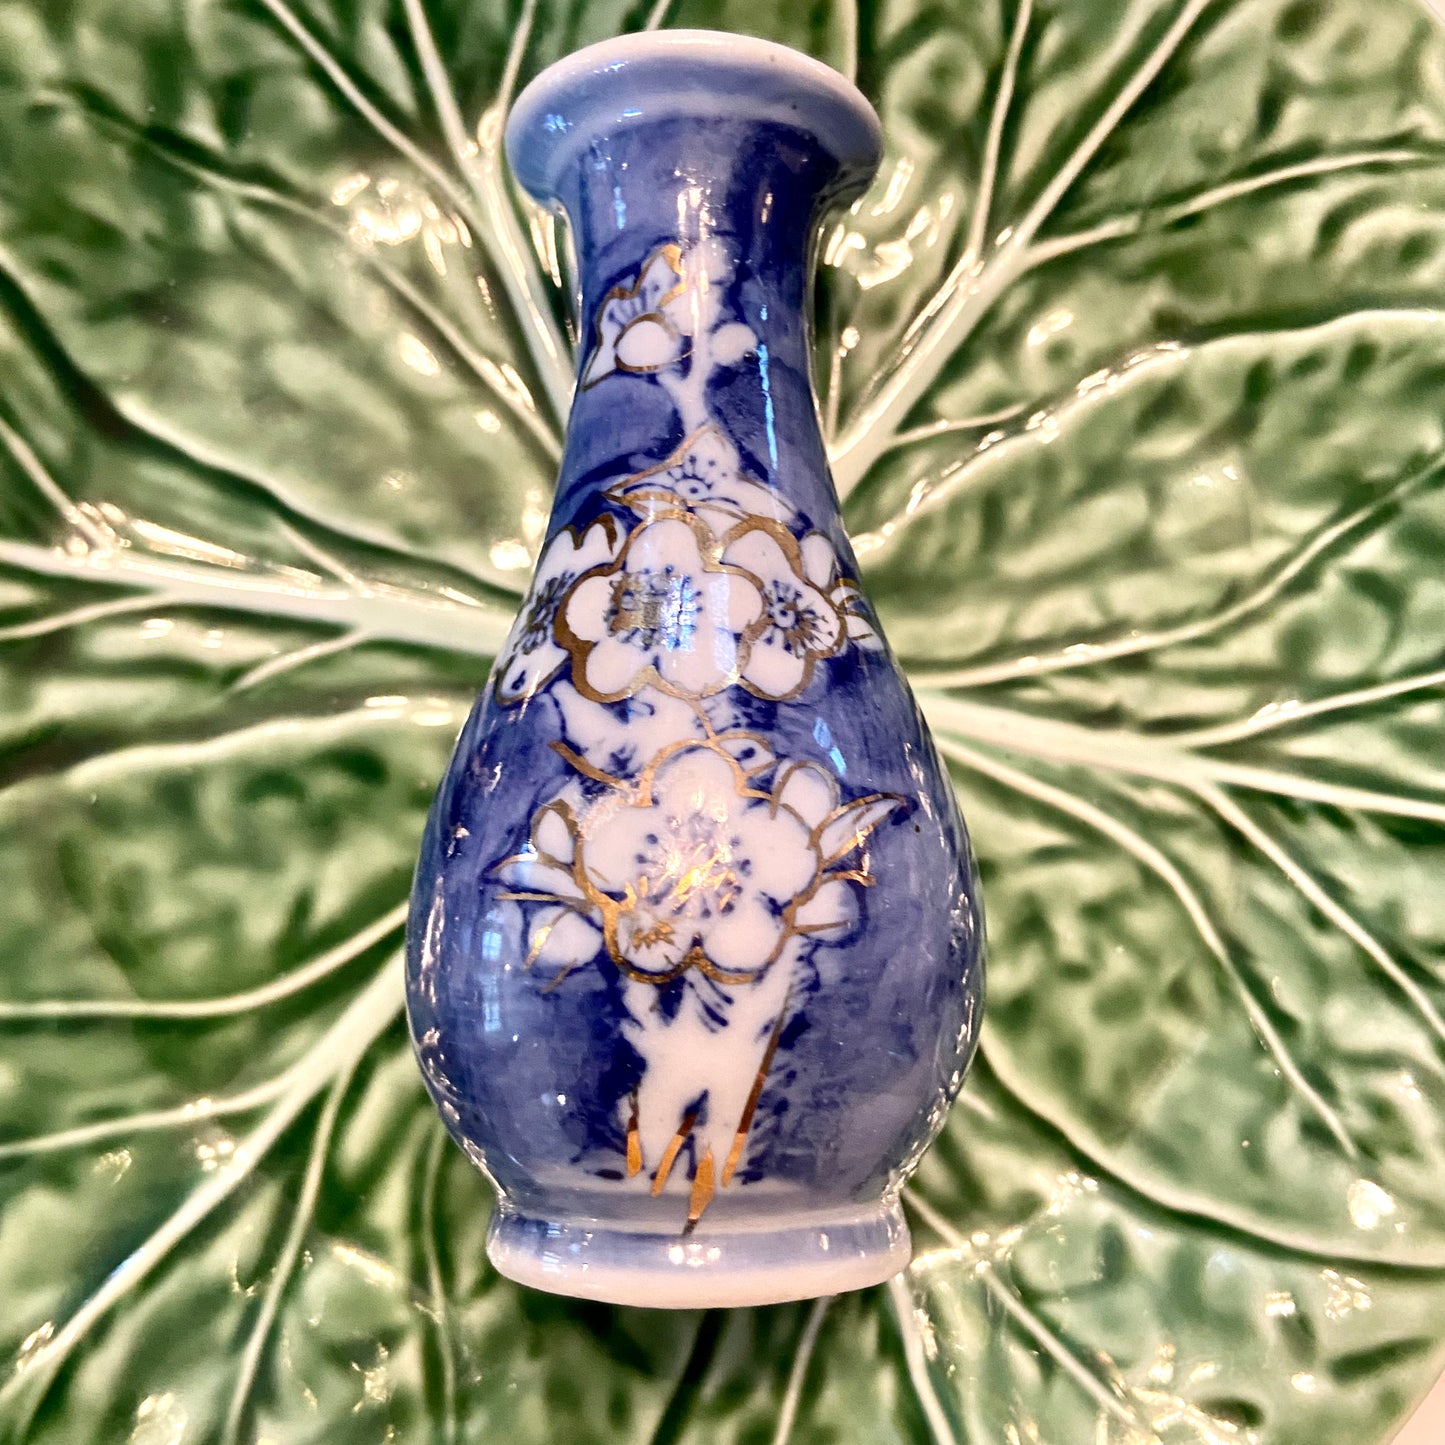 Set of 6 precious Cherry Blossom  blue and white collectable ginger jar vases